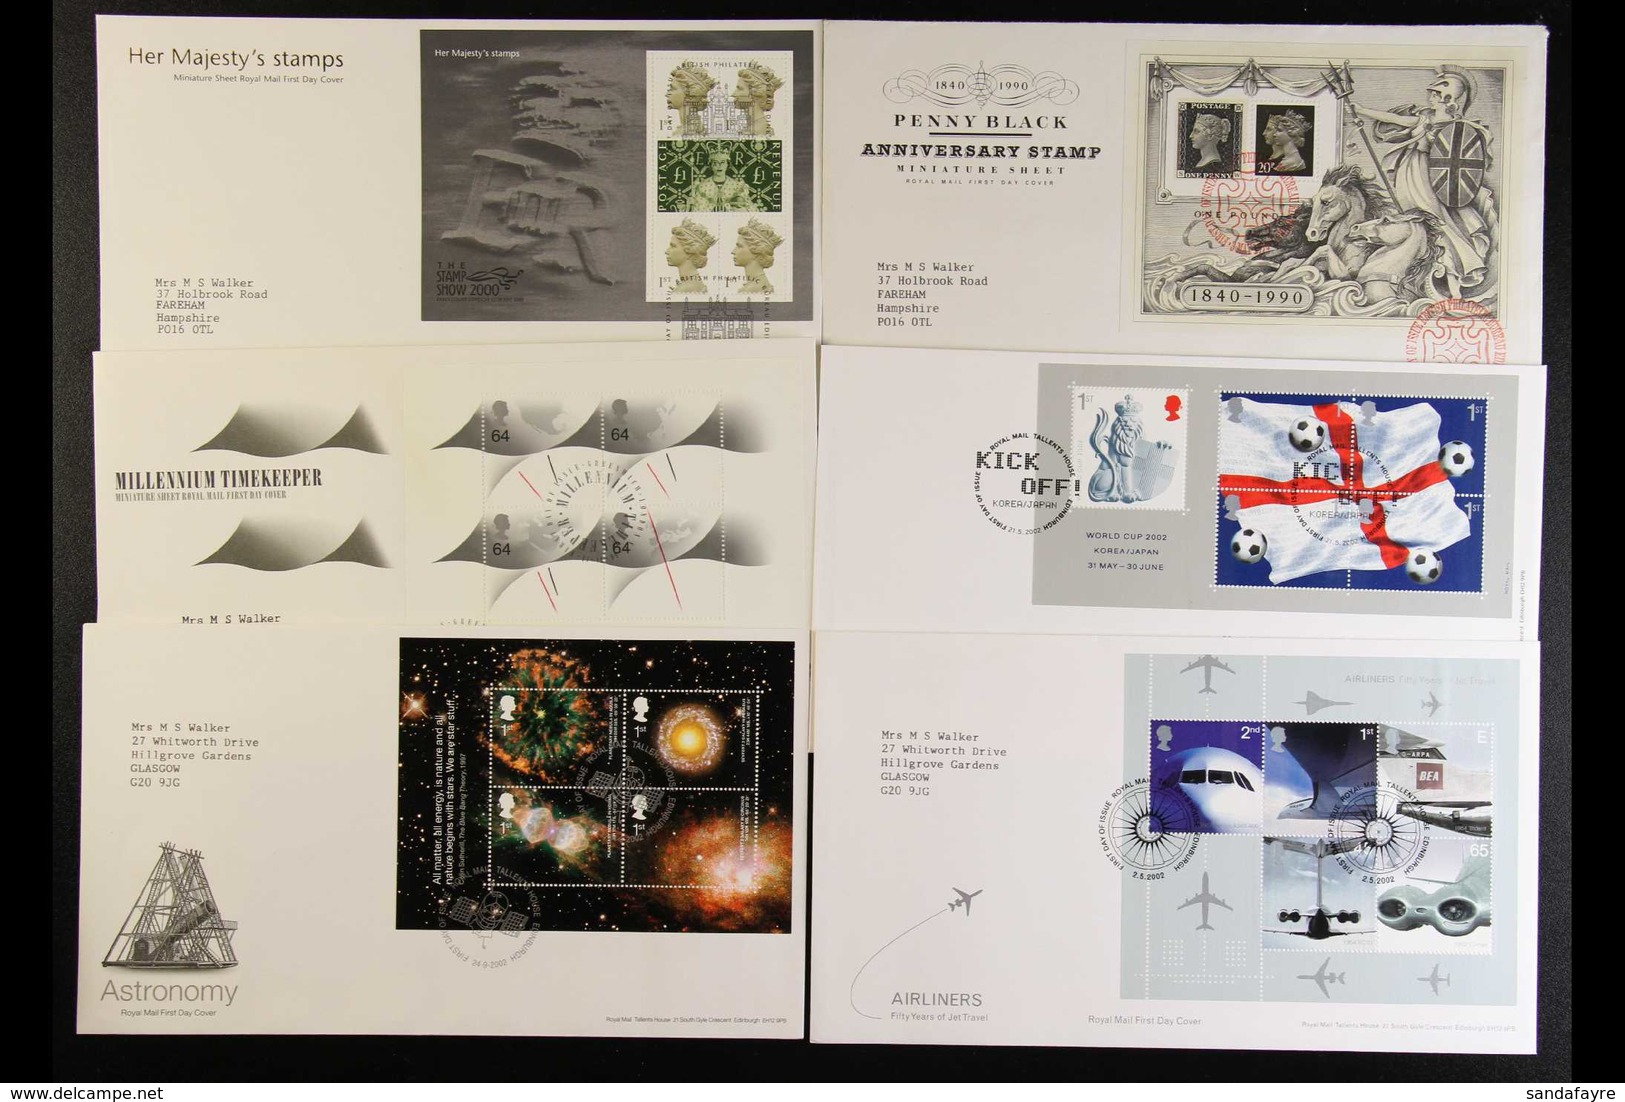 GB.FIRST DAY COVERS - FDC